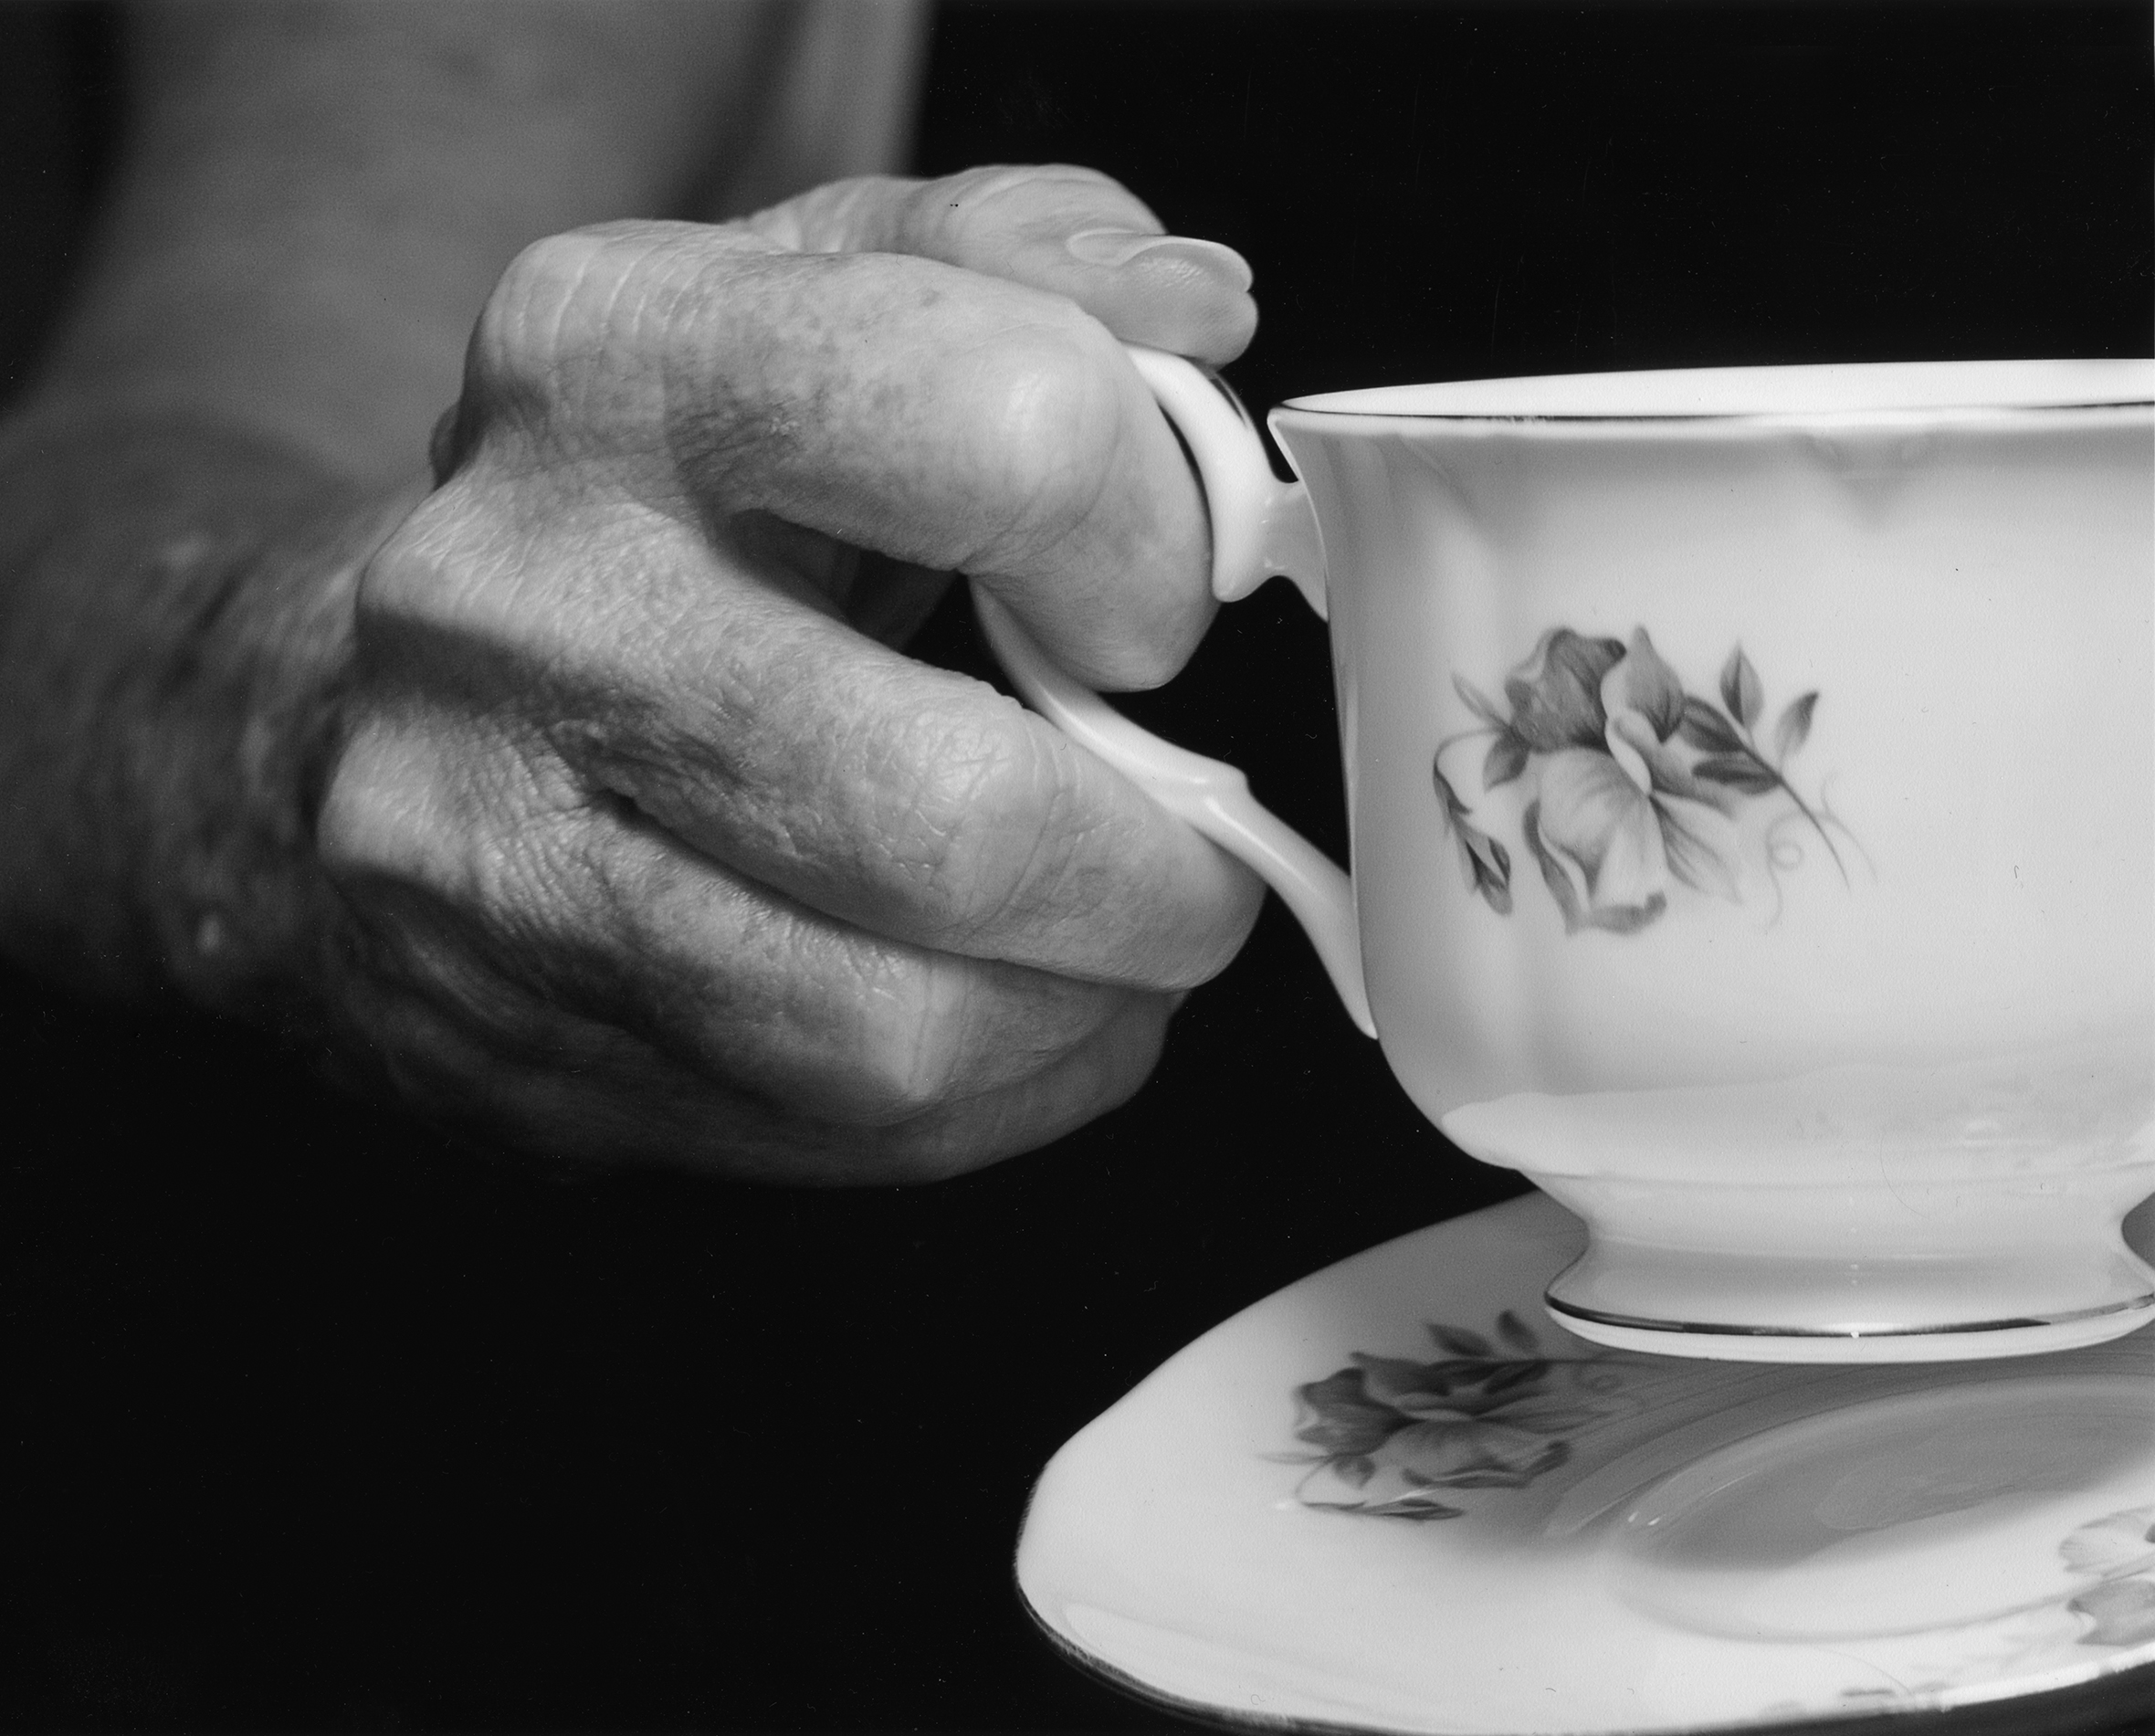 Close-up of the hand of an older woman lifting a flowered teacup by the handle off of its matching saucer.